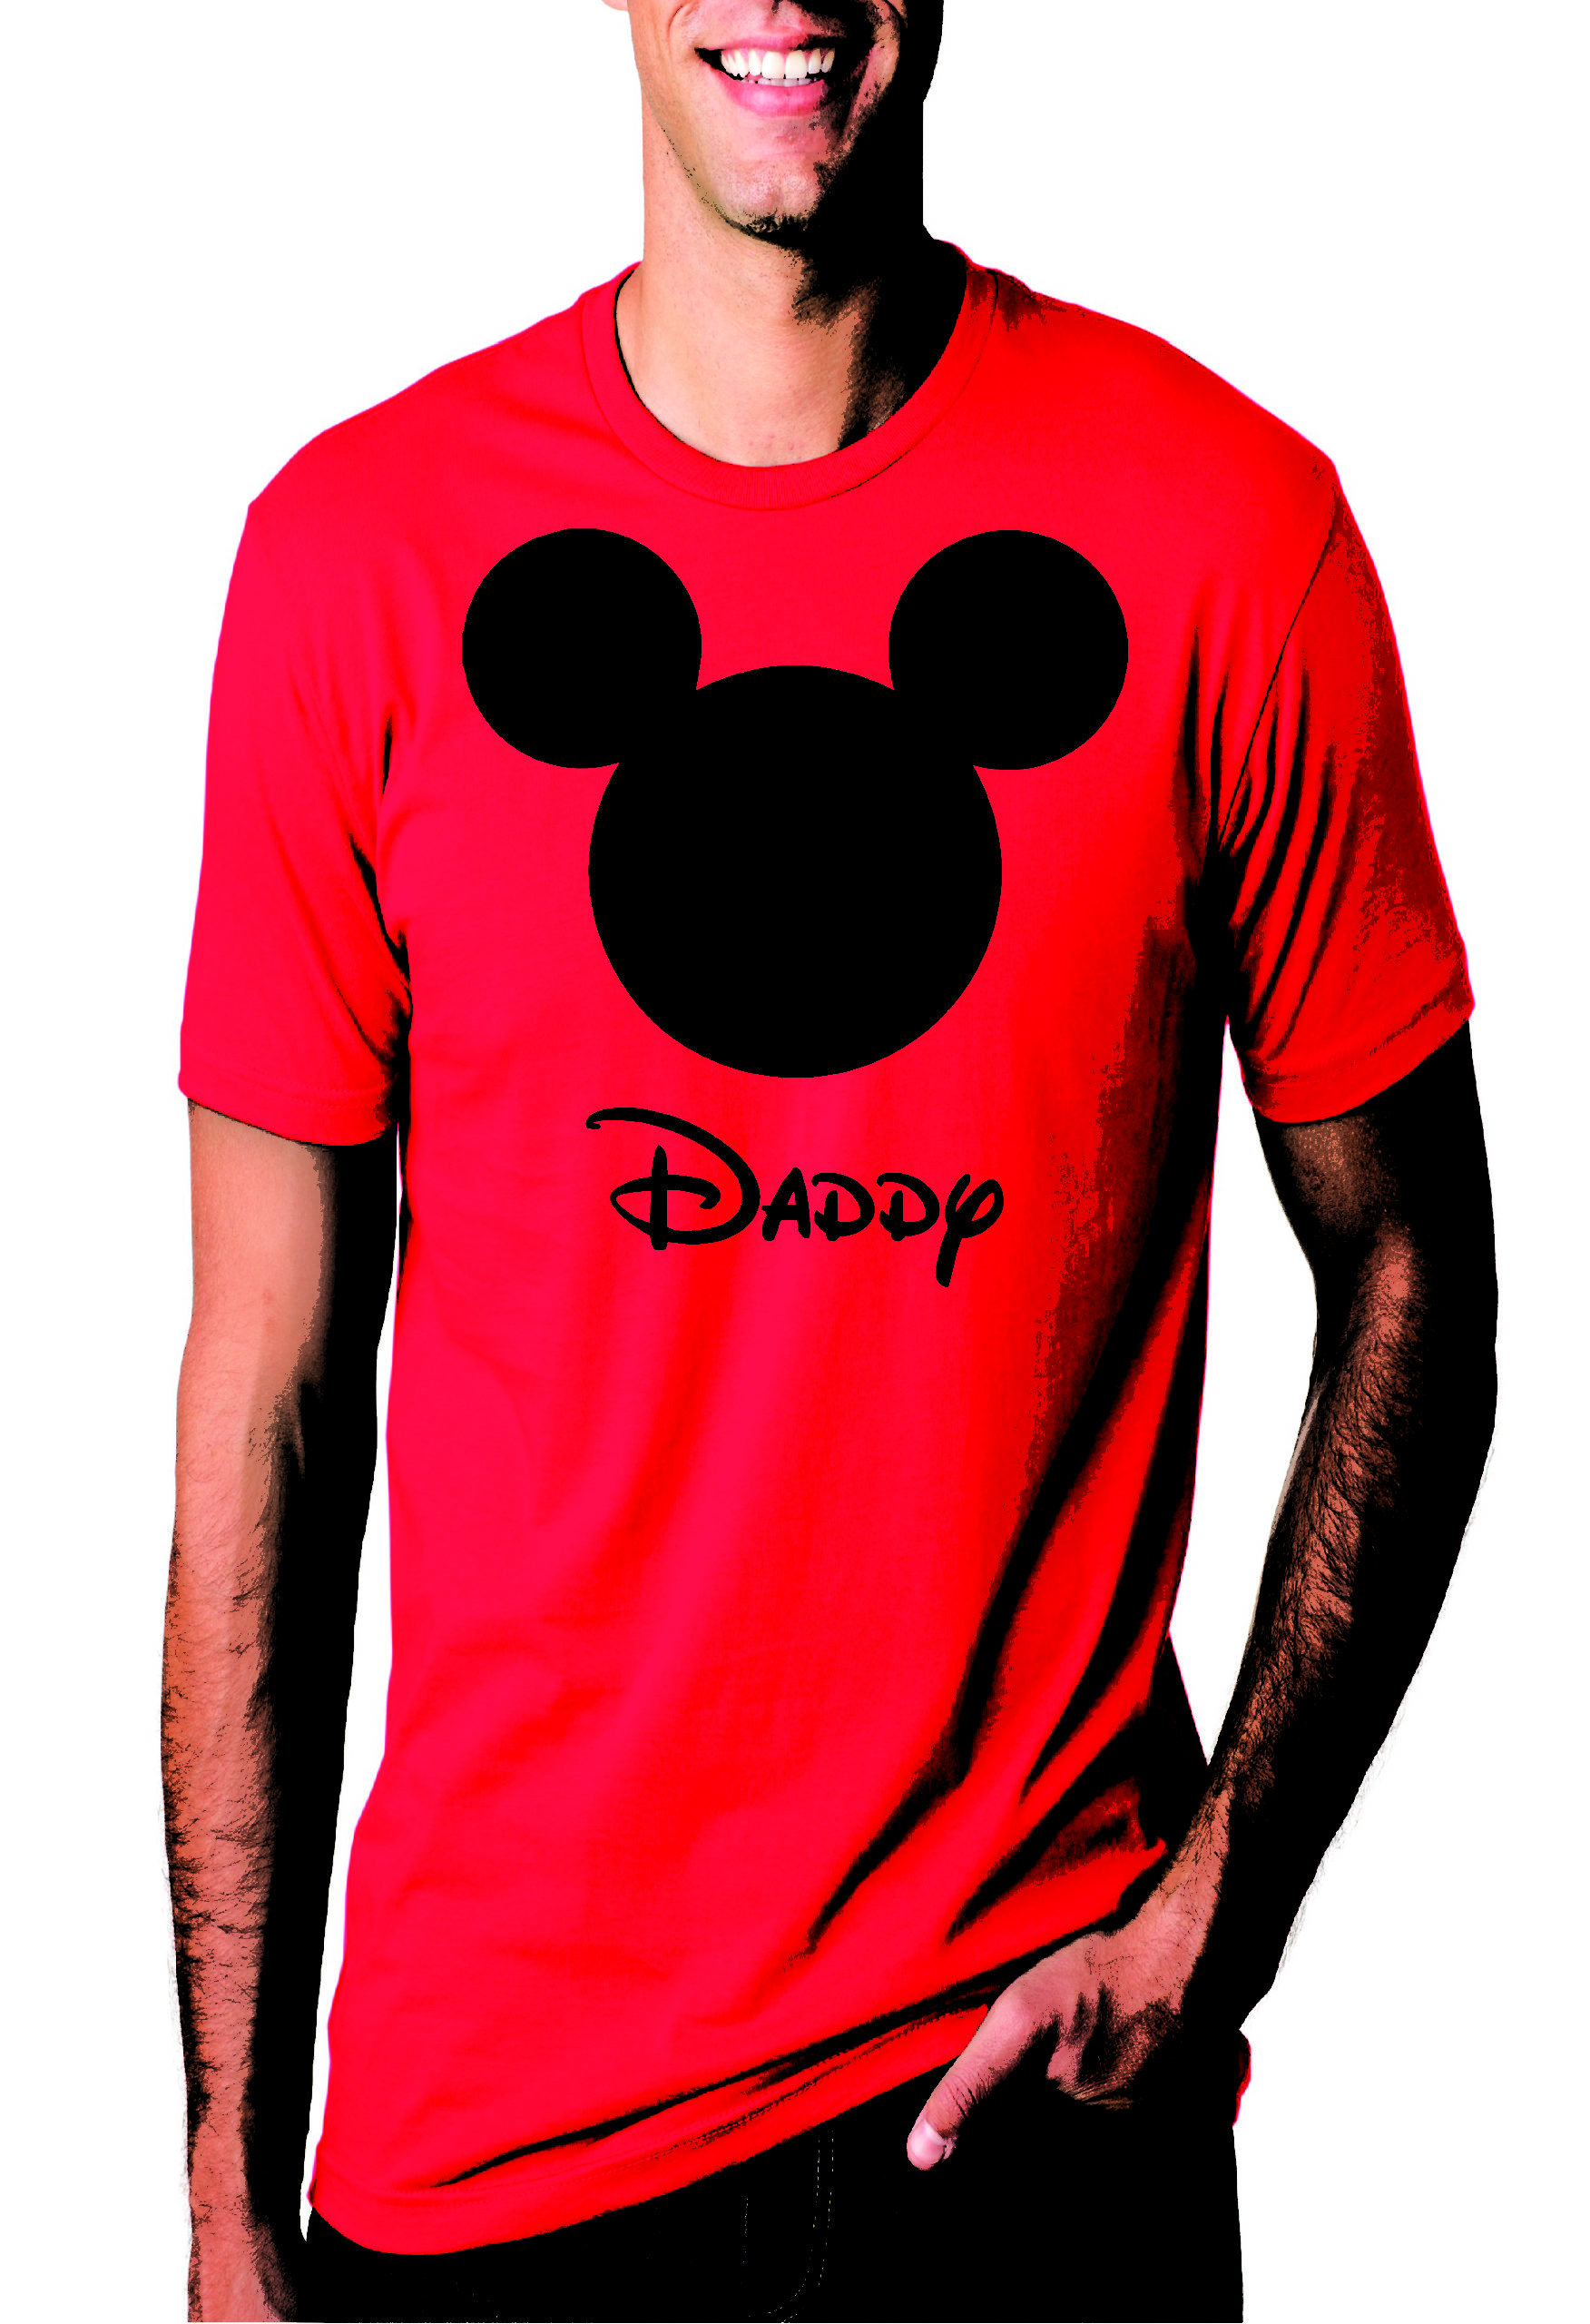 Disney Shirts - Stares Group | T-Shirt Printing and Embroidery